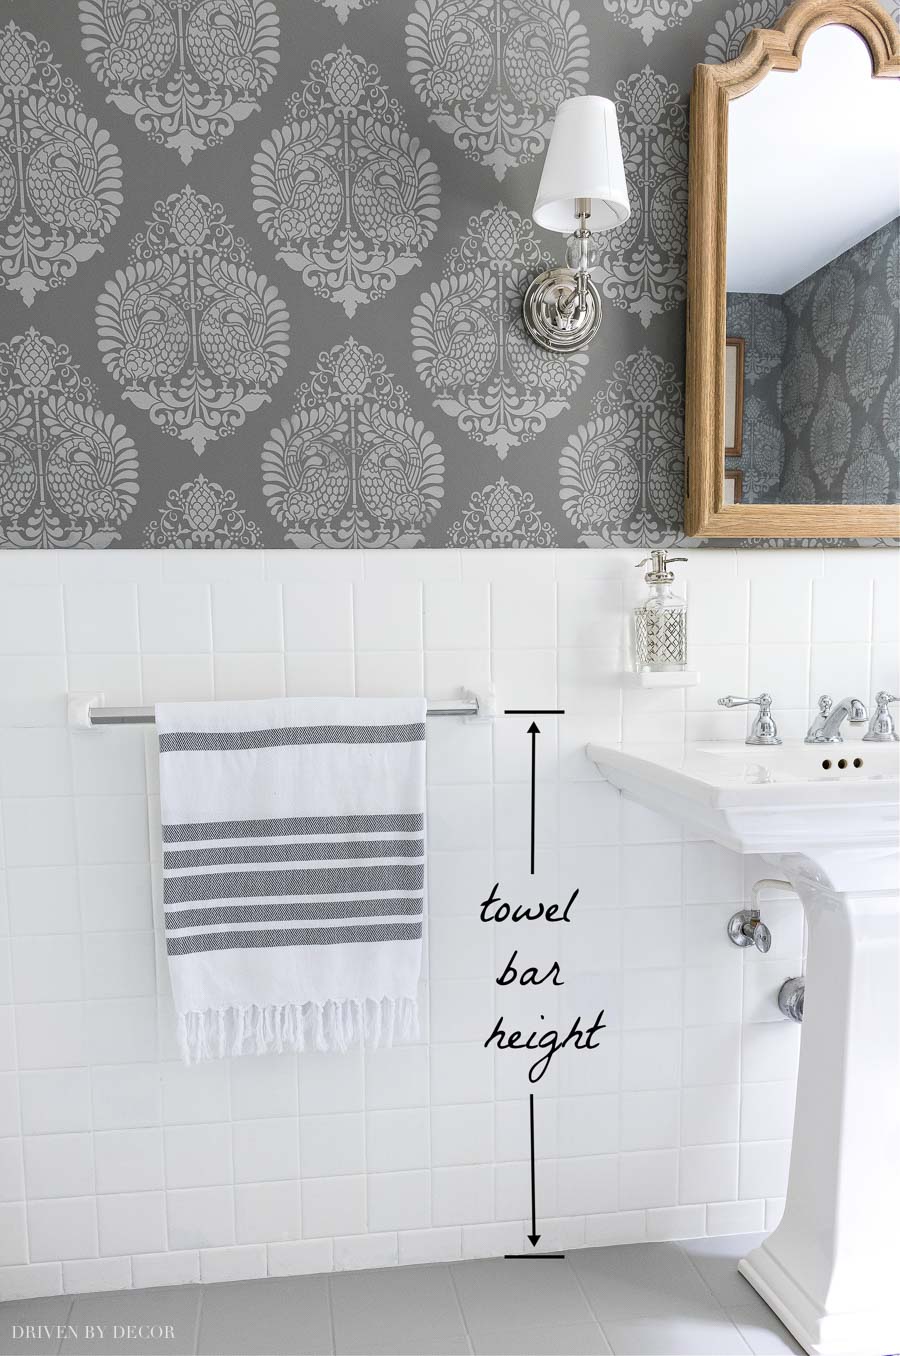 Where should the 10 hand towel bar go in this bathroom? : r